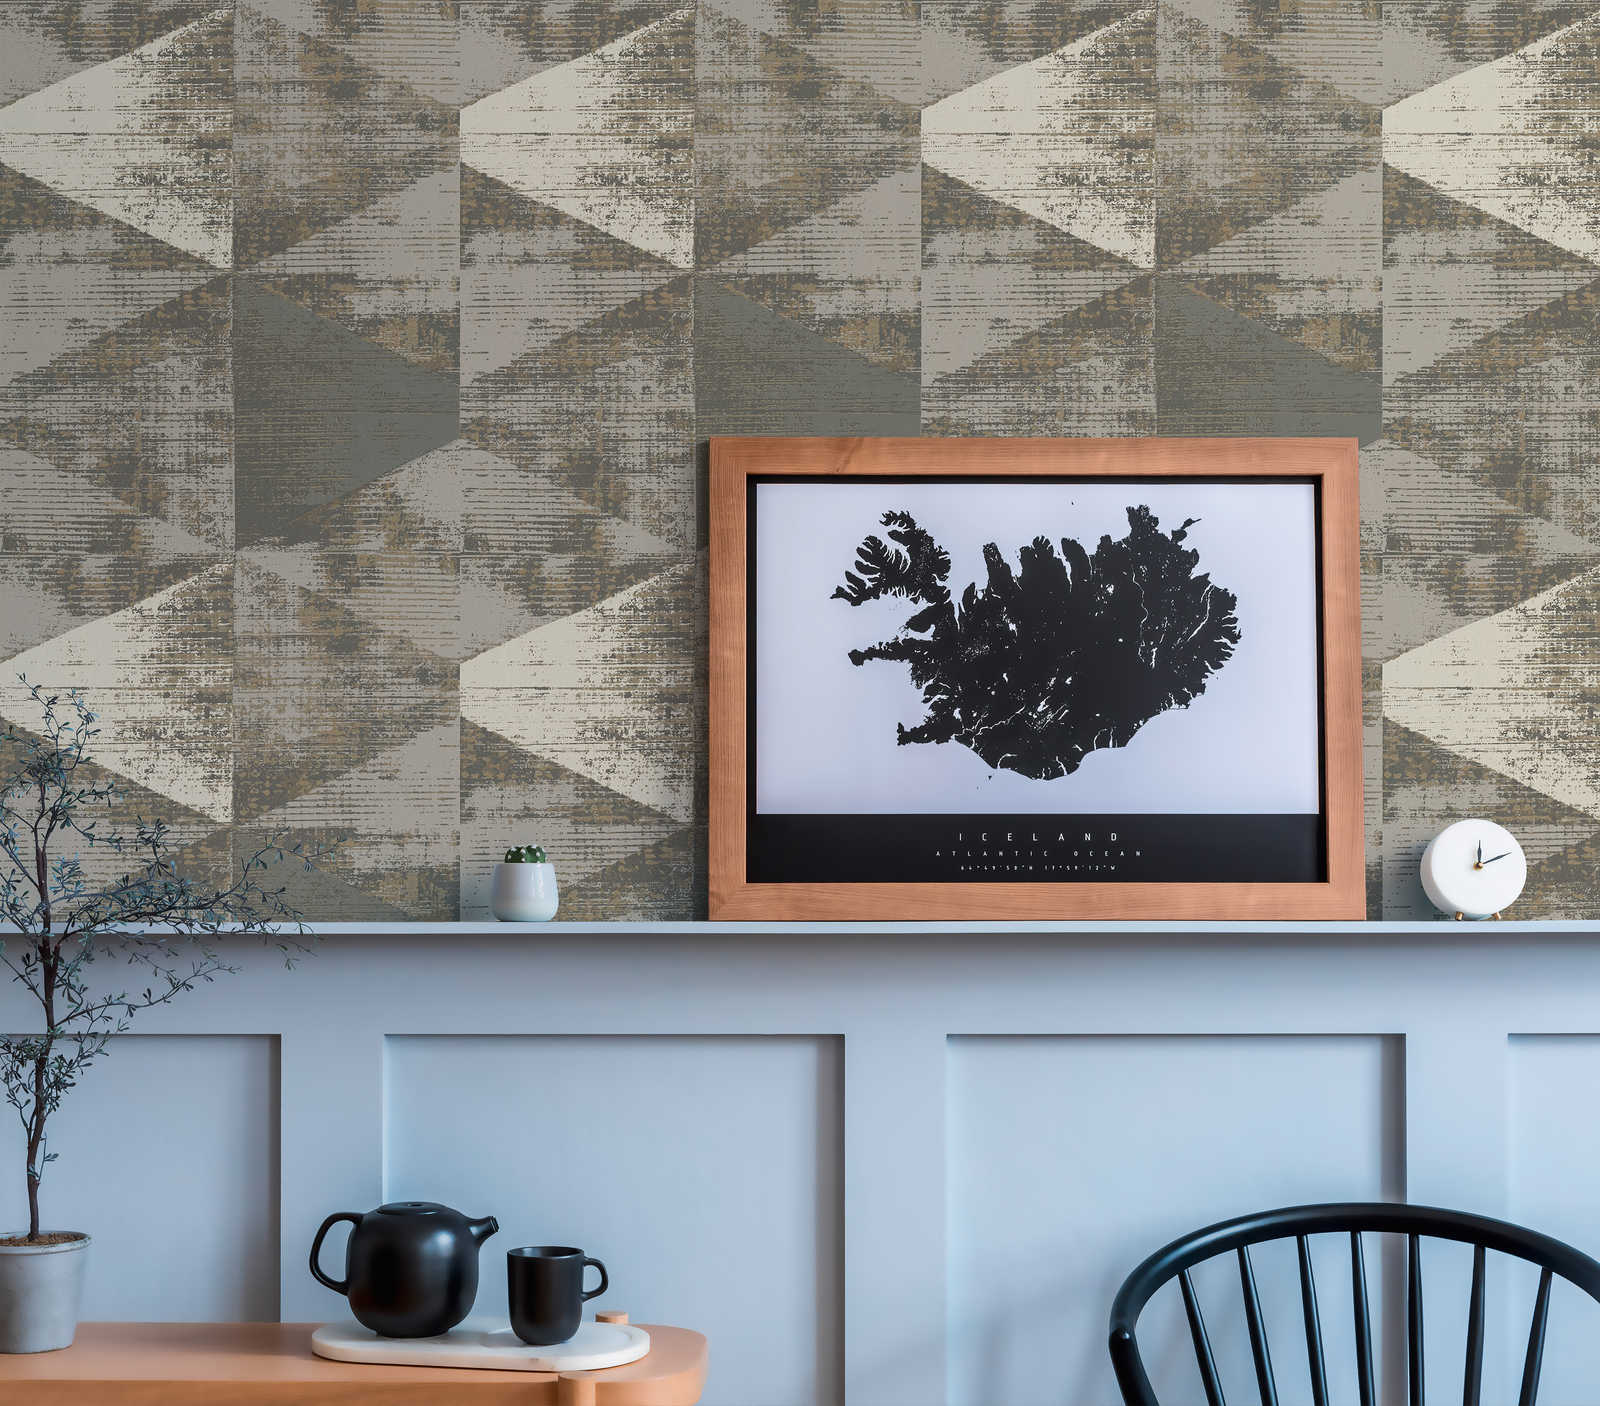             Graphic wallpaper with metallic colours and modern used look - metallic, grey
        